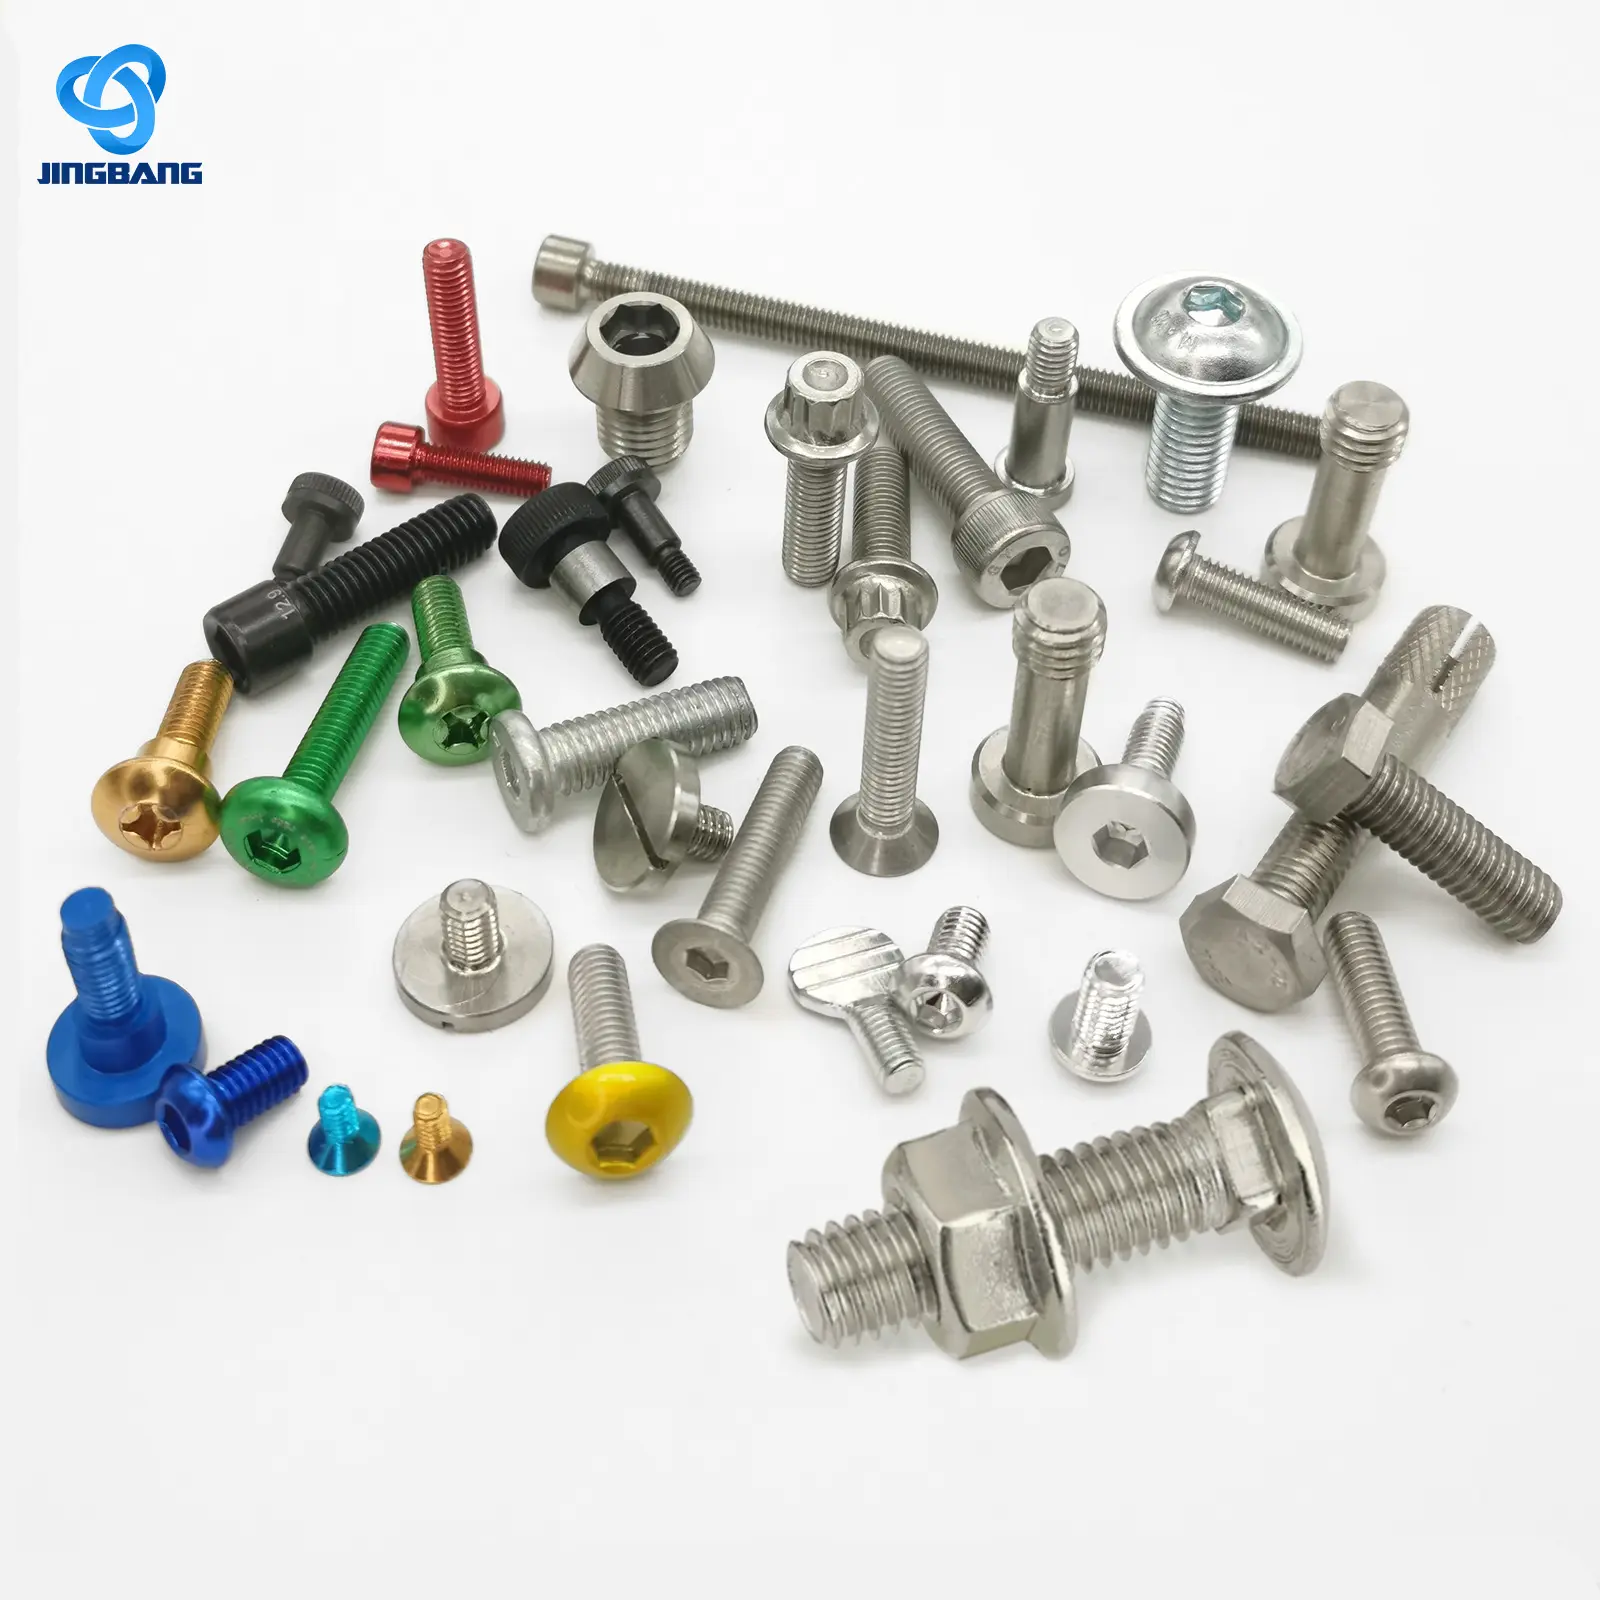 Silo Bolt M14 Longnut Bolts And Nuts For Trucks Short Neck Carriage Colby Truck Long Nut Fit Railway Screw 25Mm Excavator